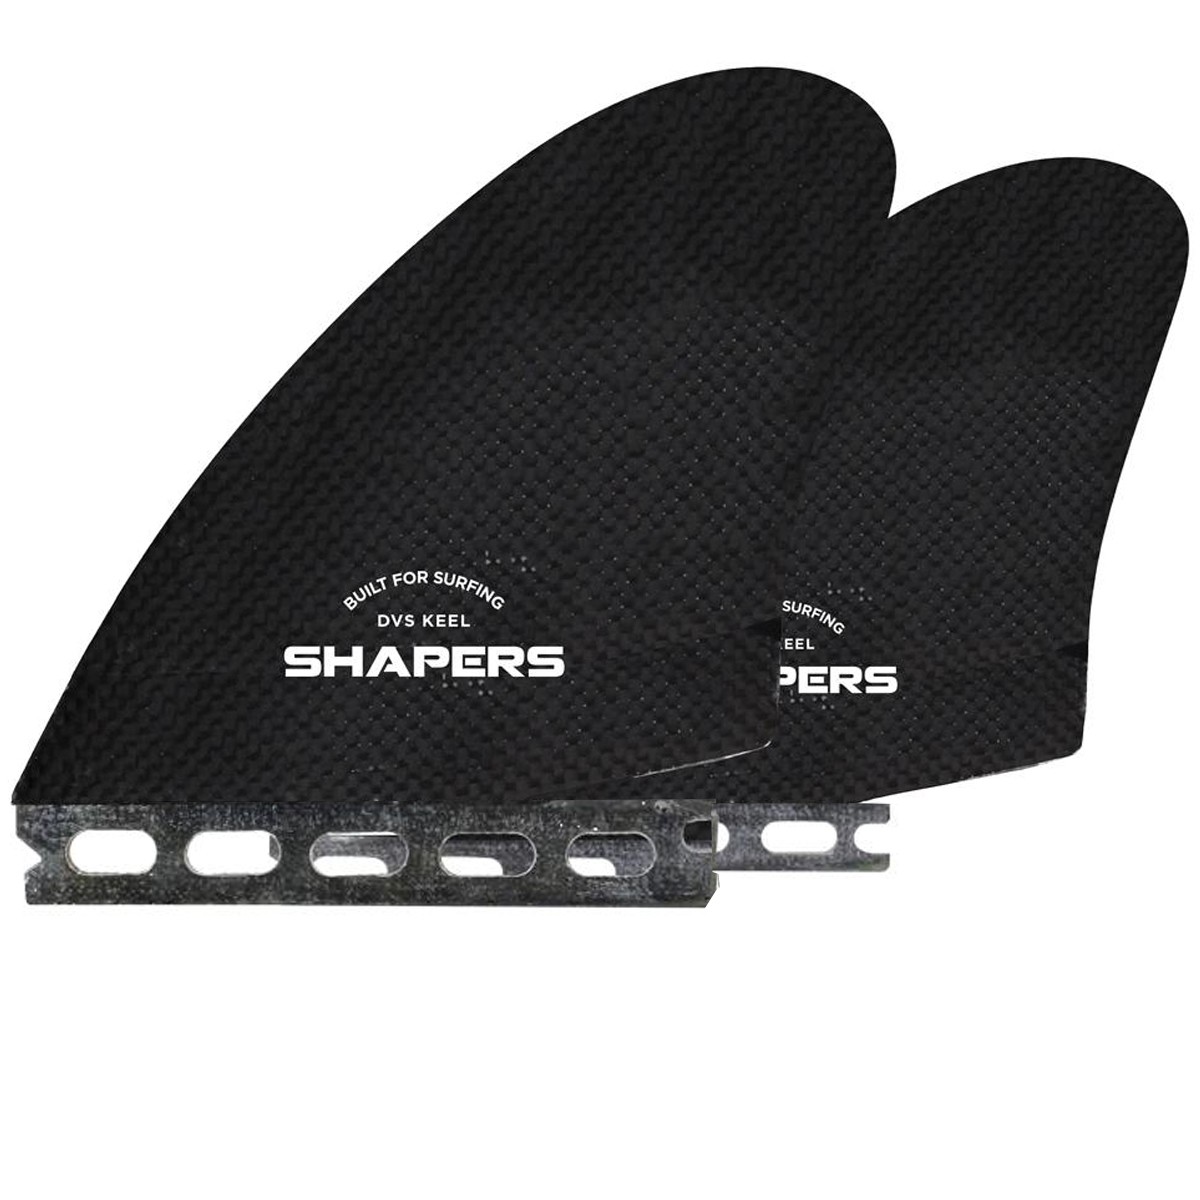 SHAPERS AM-LARGE 5fins FUTURE L-size - サーフィン・ボディボード